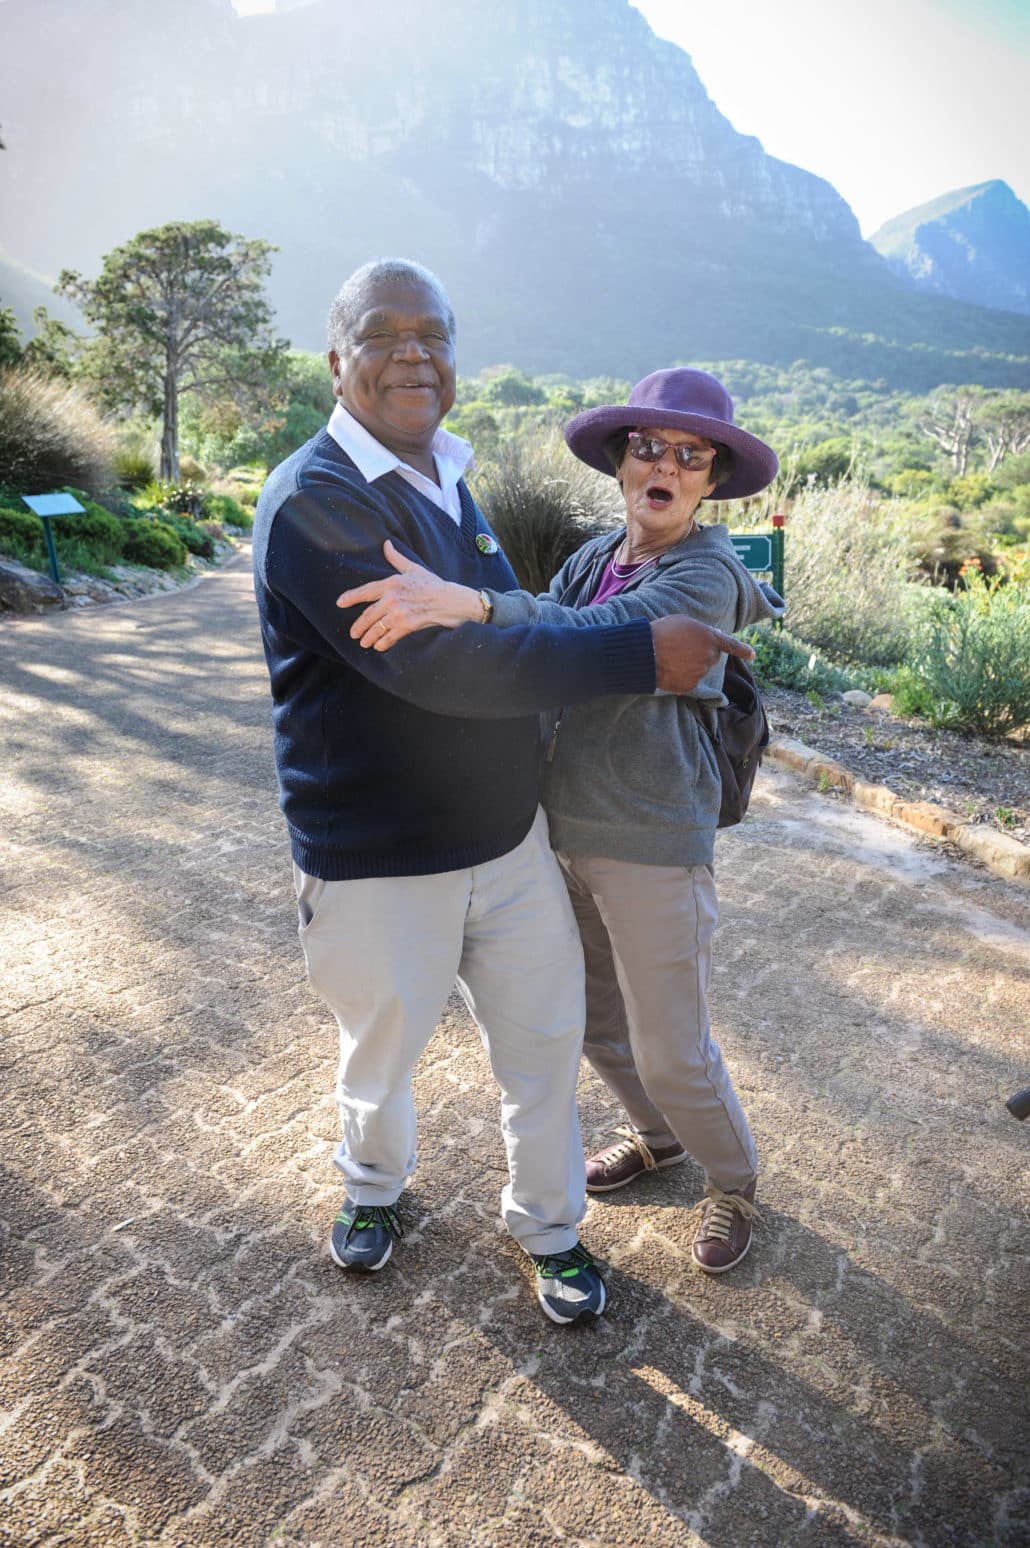 Andrew Phillip Jacobs, our guide for this day and 40-year employee at Kirstenbosch National Botanical Garden, engages with a volunteer who frequents the park